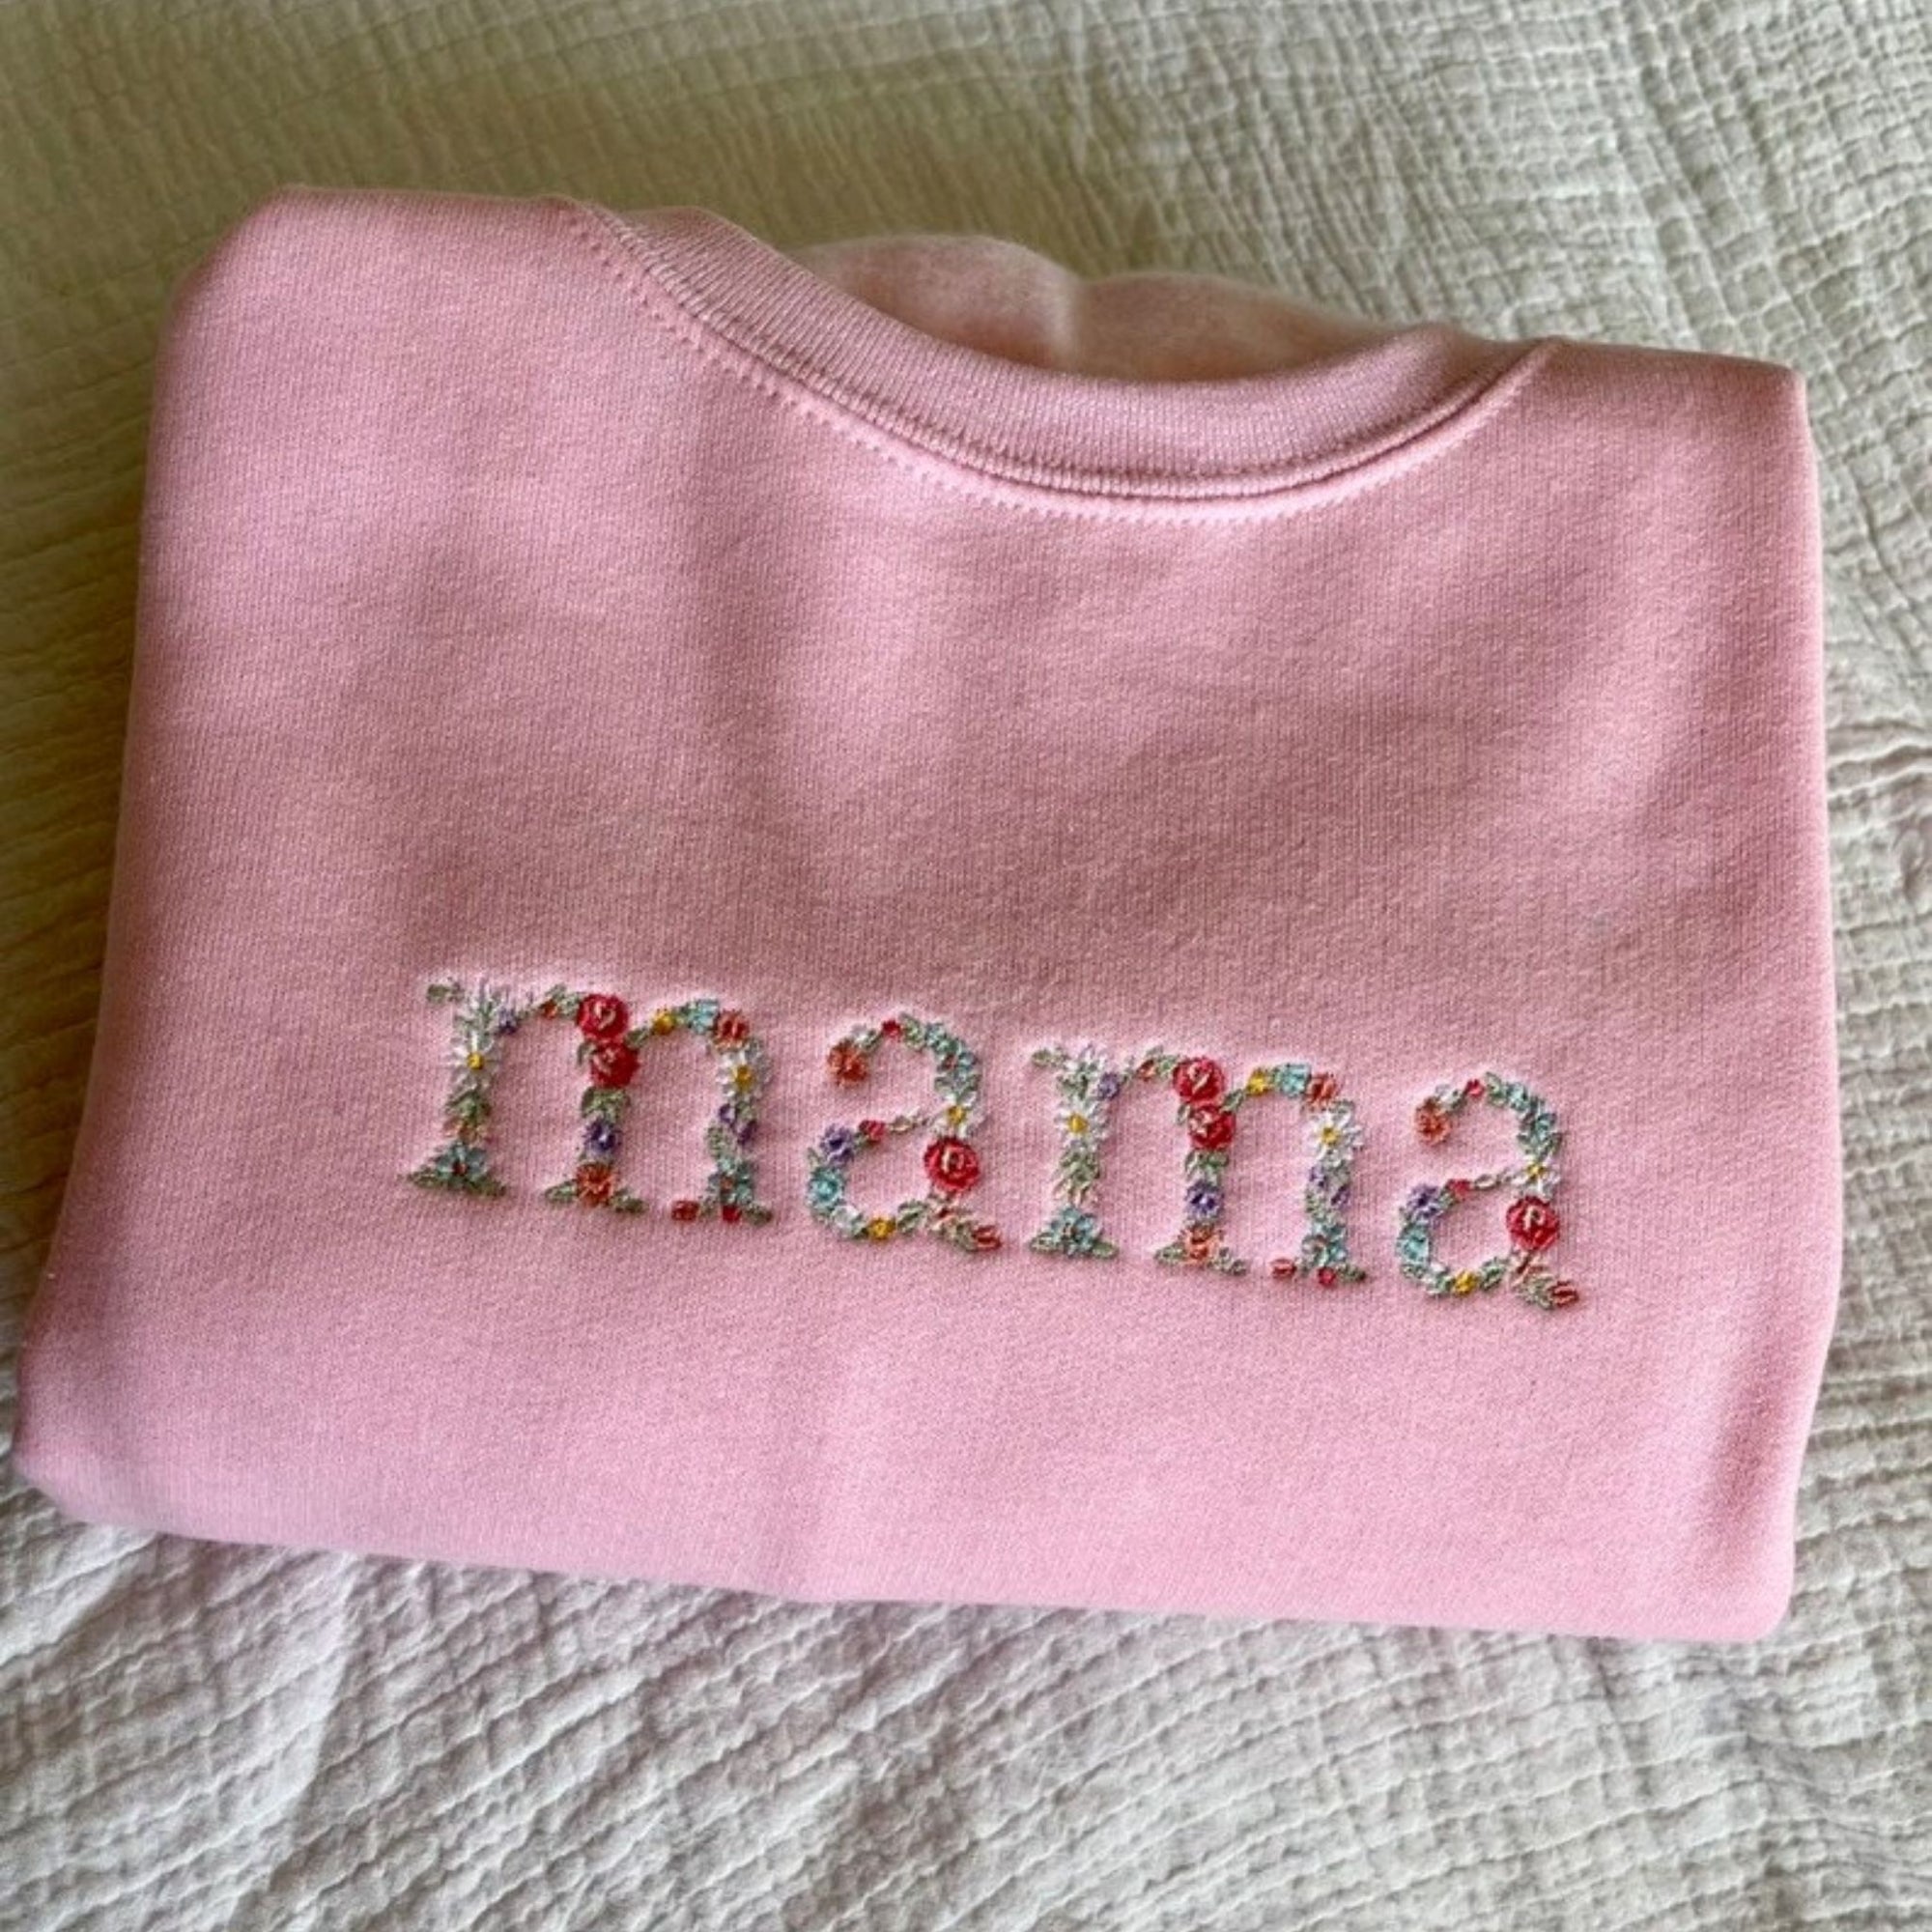 Mama Floral Sweatshirt, Embroidered Crewneck Floral Letters, The Best Gift For Mama